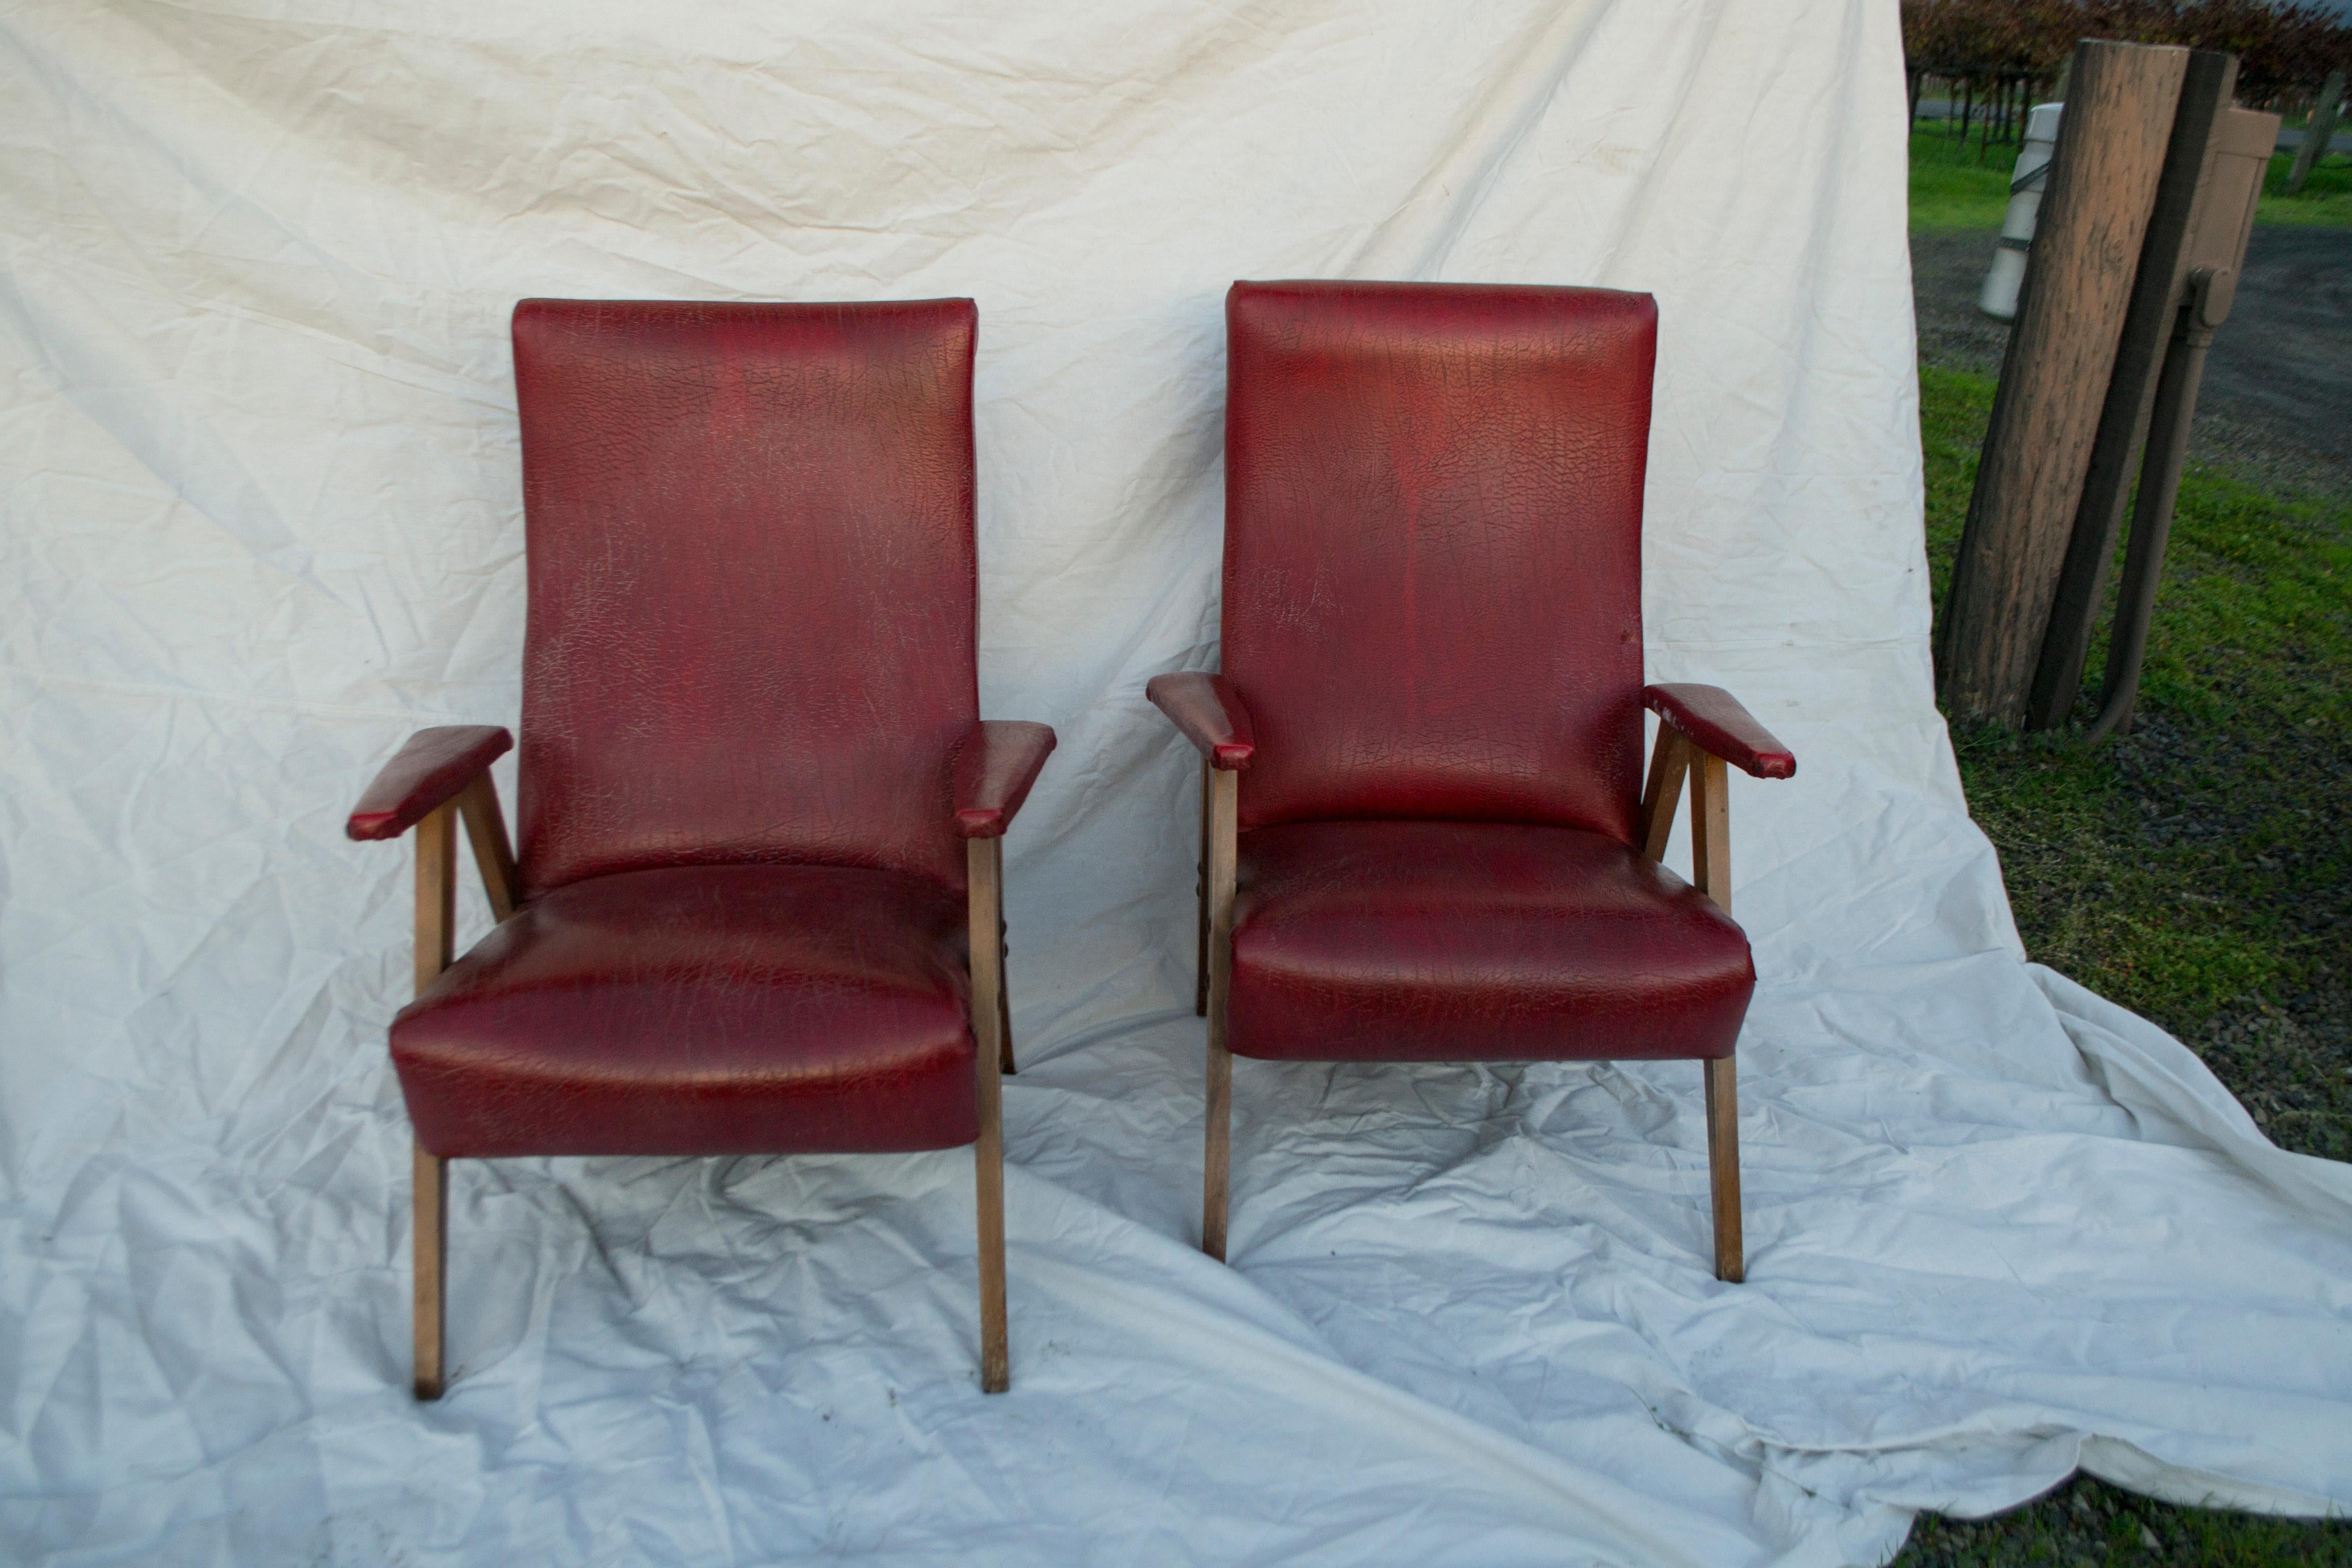 Vintage Red Leather Armchairs, circa 20th Century For Sale 1